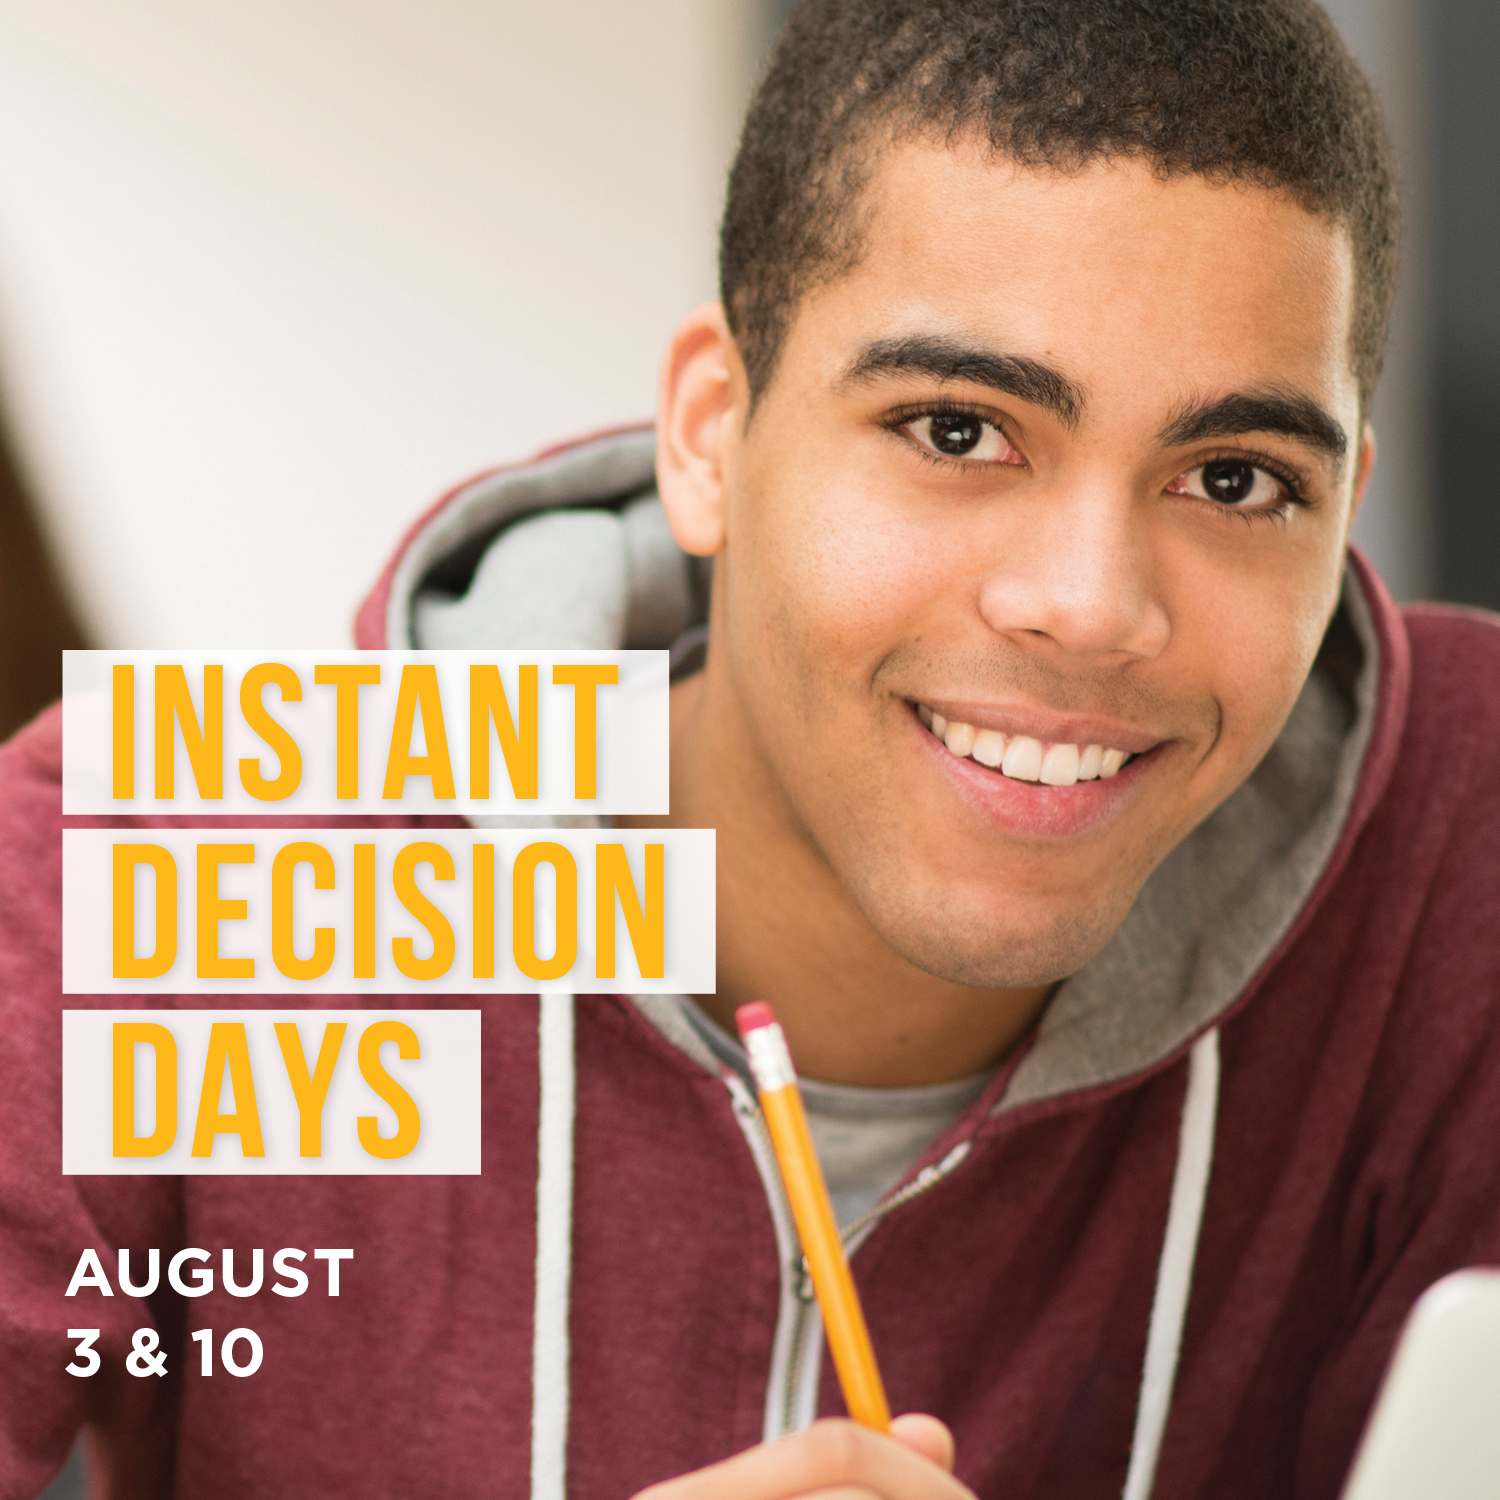 Get an instant decision on your college application on August 3 and 10.